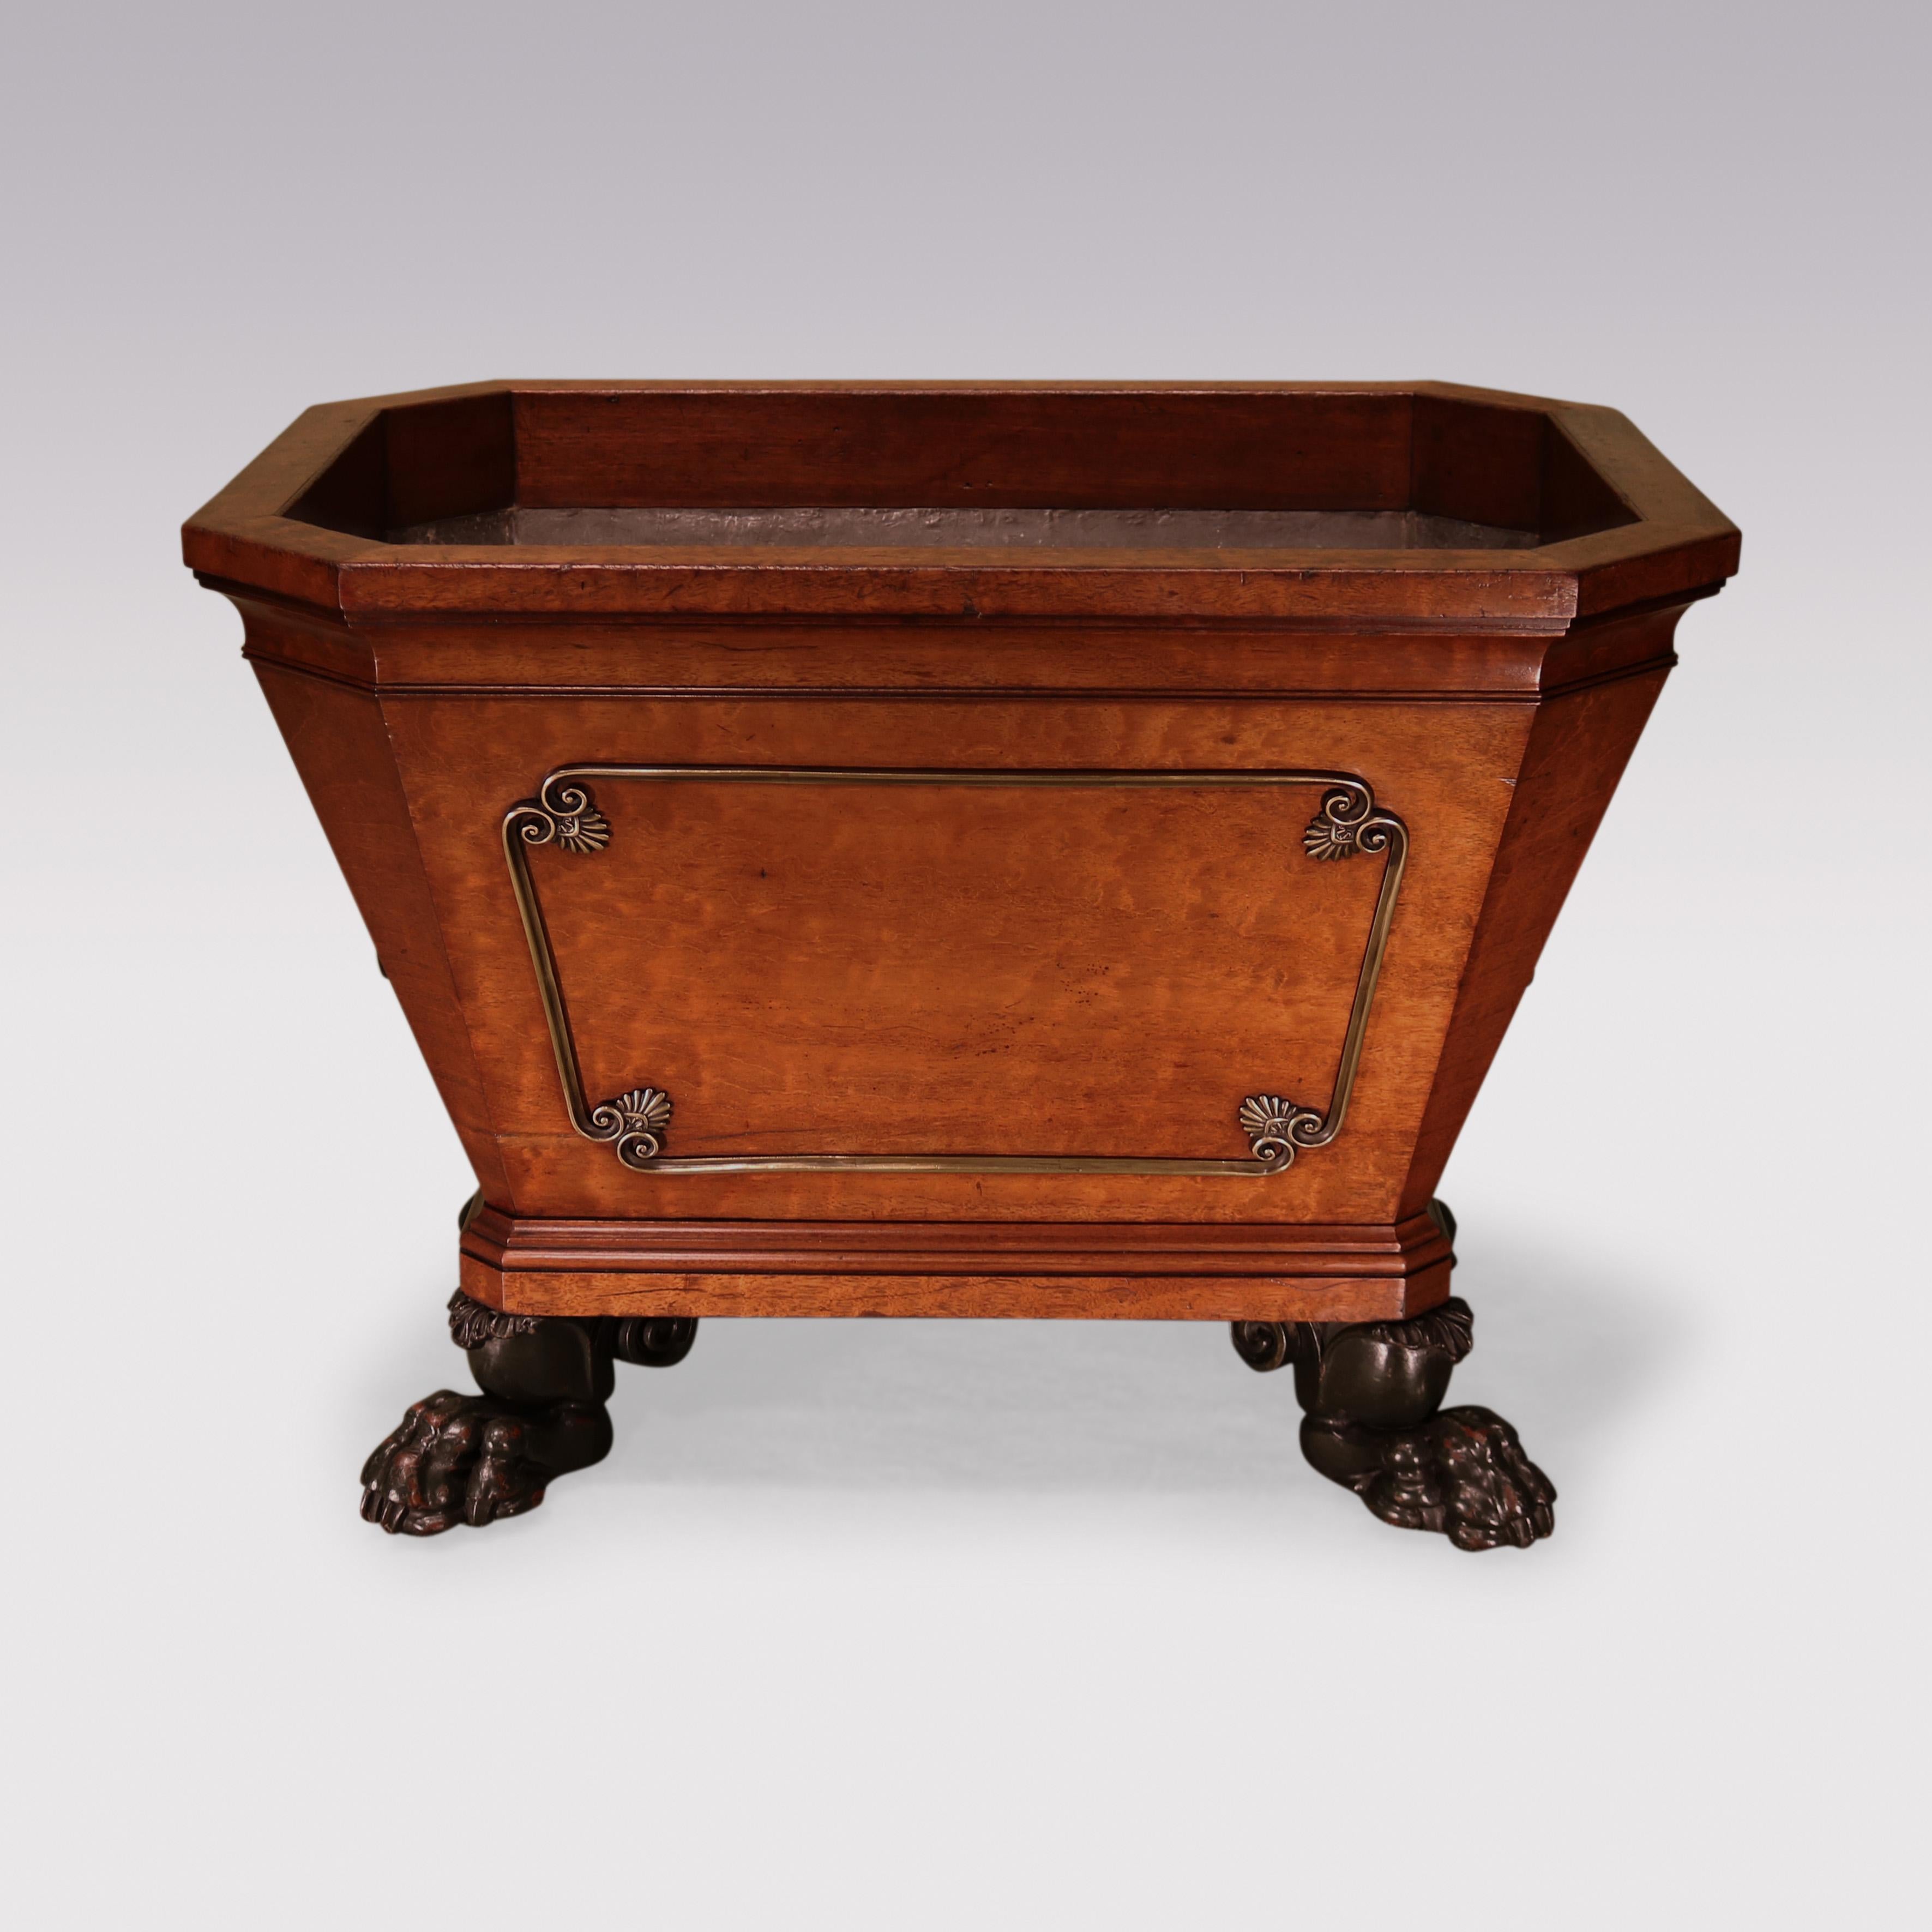 A fine quality early 19th Century Regency period plum-pudding mahogany Cellarette of sarcophagus shape with canted corners, having scrolled brass mounts with anthemion corners to the sides with bronze shell & acanthus handles, supported on bold